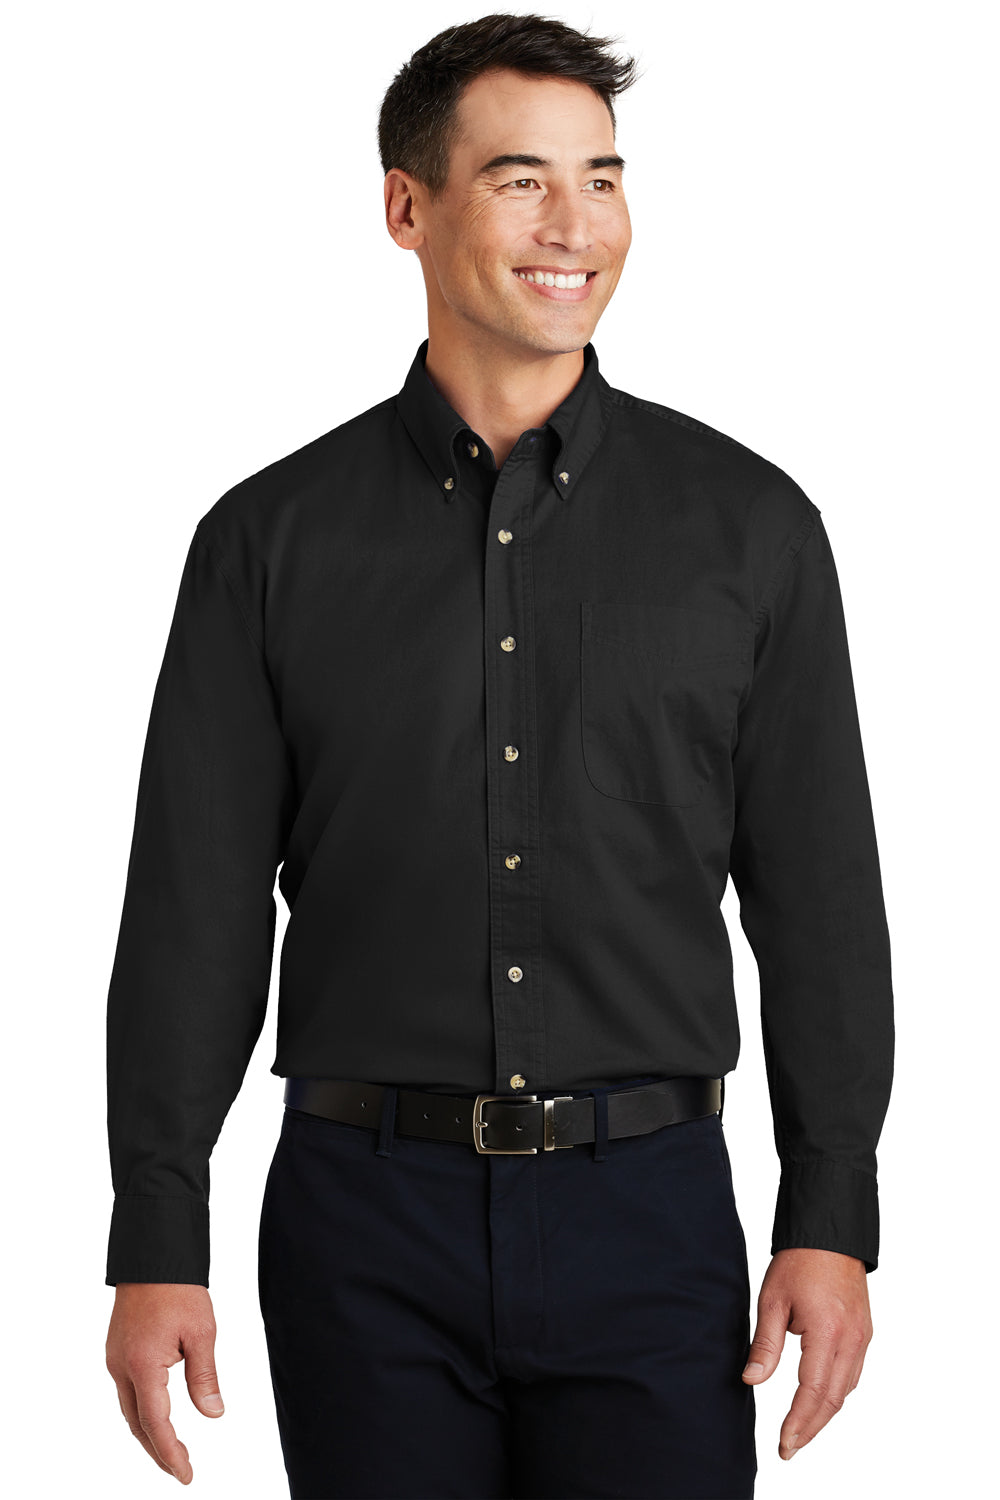 Port Authority S600T Mens Long Sleeve Button Down Shirt w/ Pocket Black Front